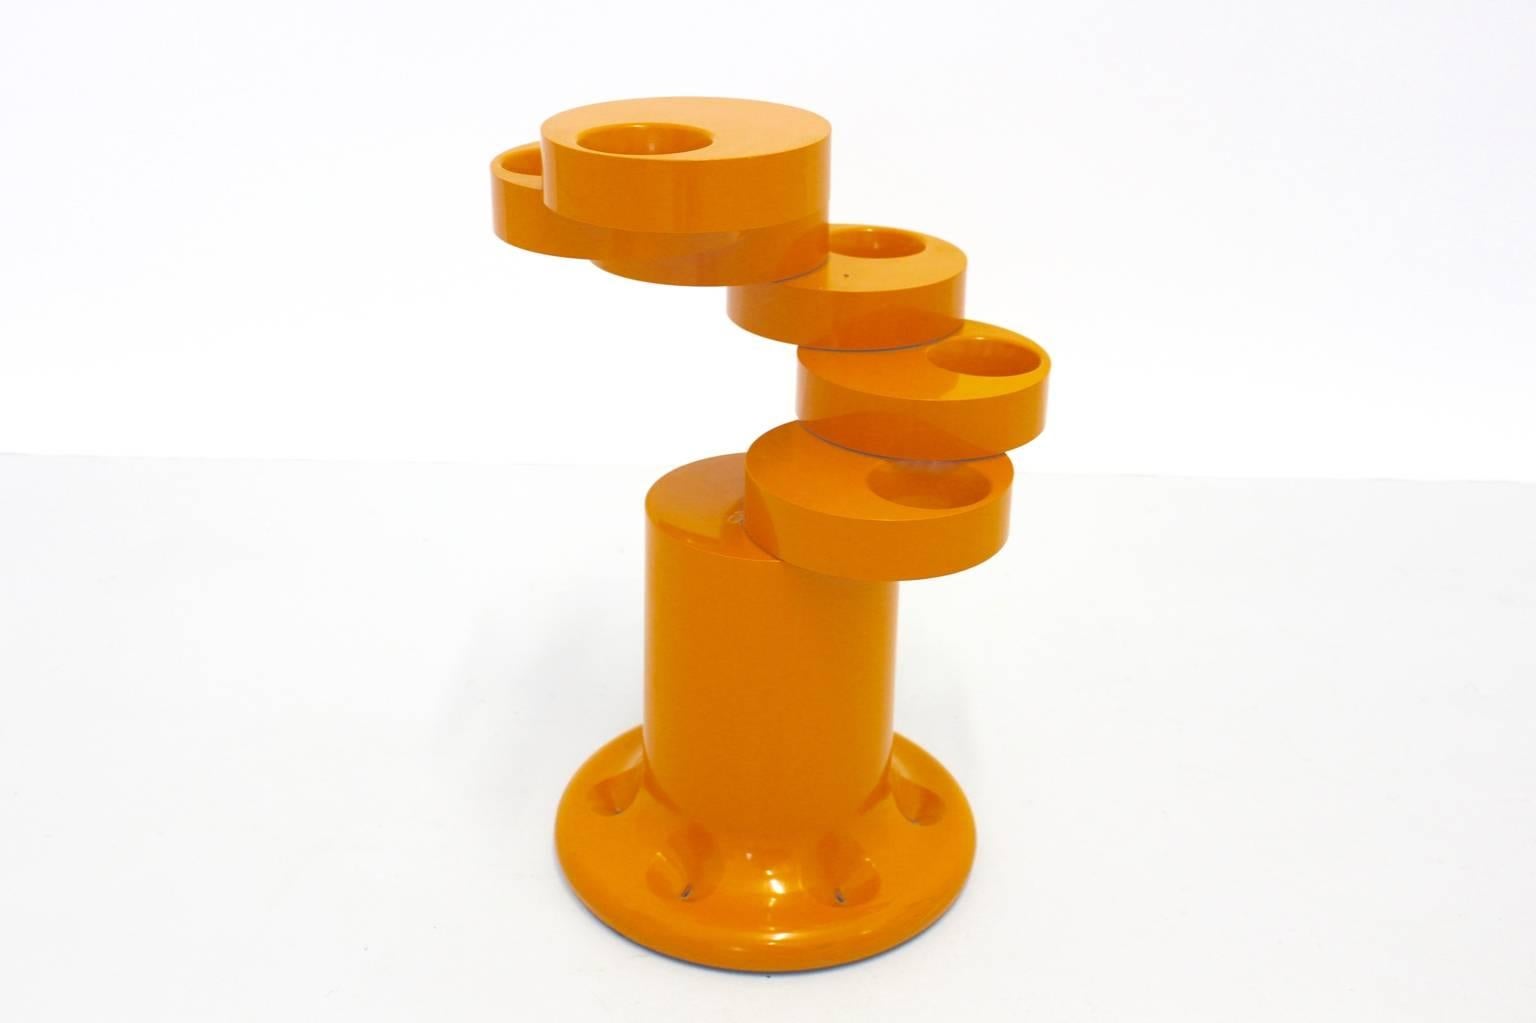 Orange umbrella stand named Pluvium designed by Giancarlo Piretti and executed by Aanonima Castelli, Italy, 1960s.
An amazing umbrella stand from plastic in orange color created to hold six umbrellas when the umbrella stand is folded up.
Also to